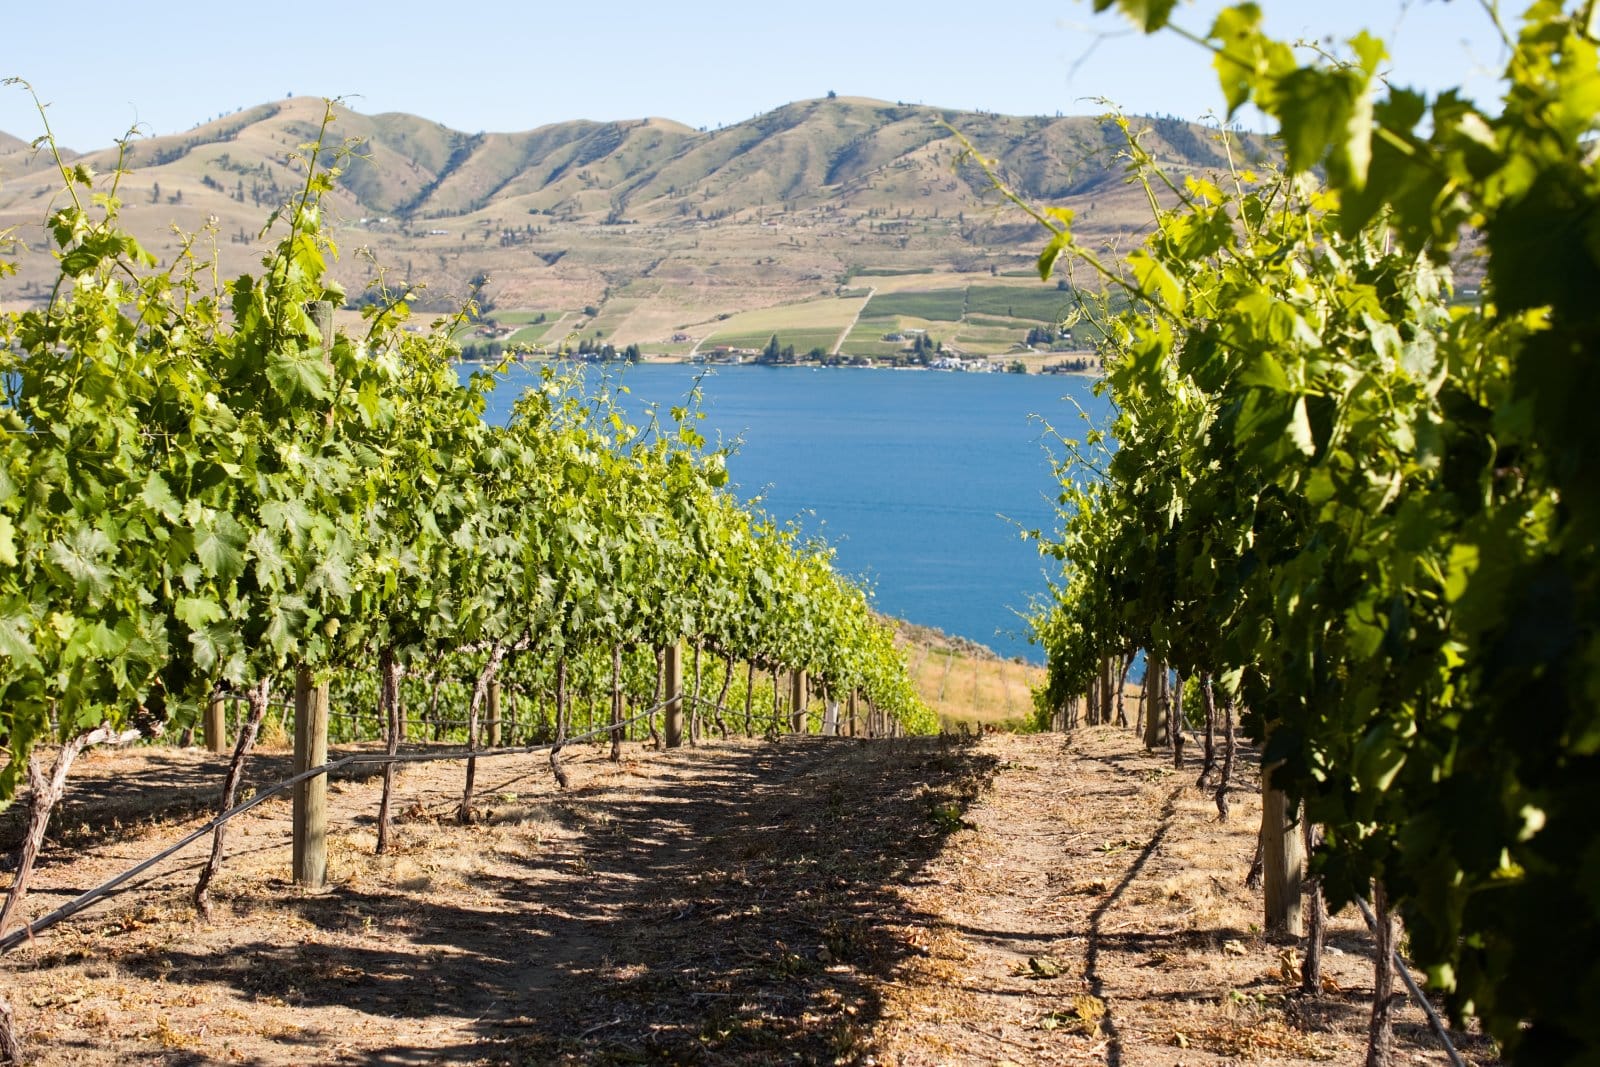 <p class="wp-caption-text">Image Credit: Shutterstock / Jacquelynn Brynn</p>  <p><span>Encompassing most of Washington’s wine production, Columbia Valley is vast and varied, producing everything from crisp Rieslings to powerful Syrah.</span></p>